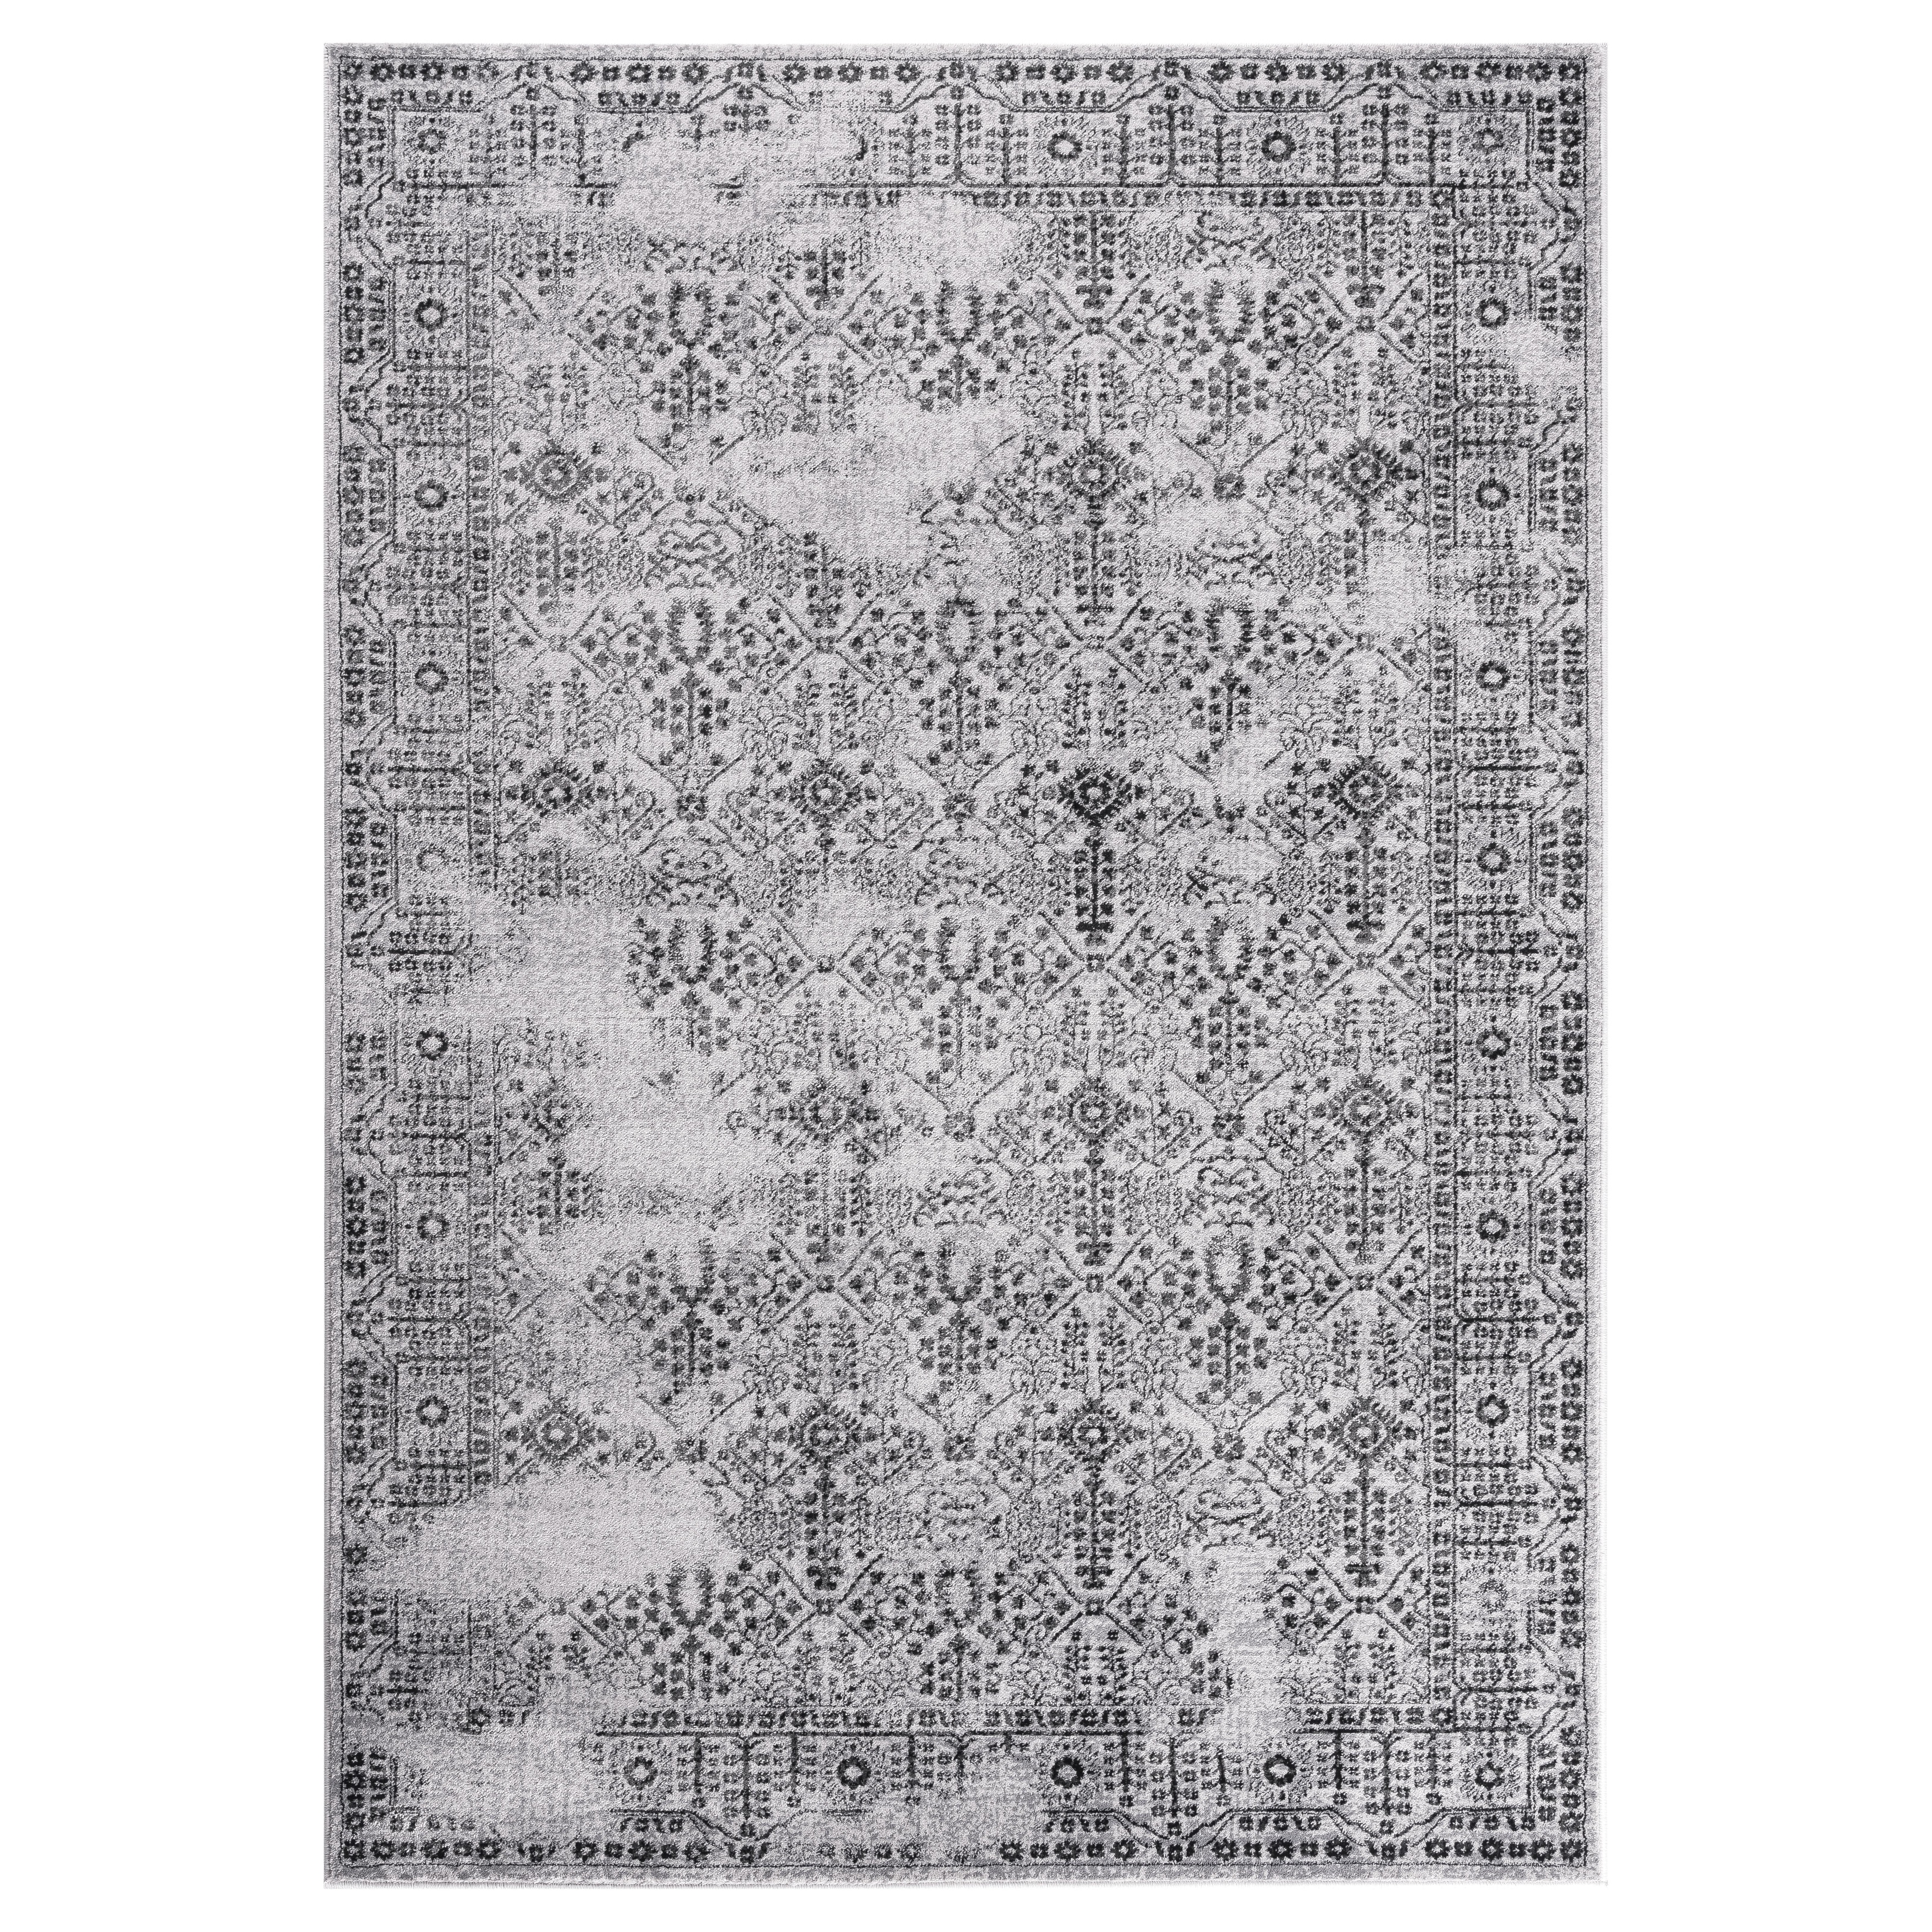 Gad Daisy Collection Garden Chic Classic/transional L.gray/d.gray Rug - 22 X 3